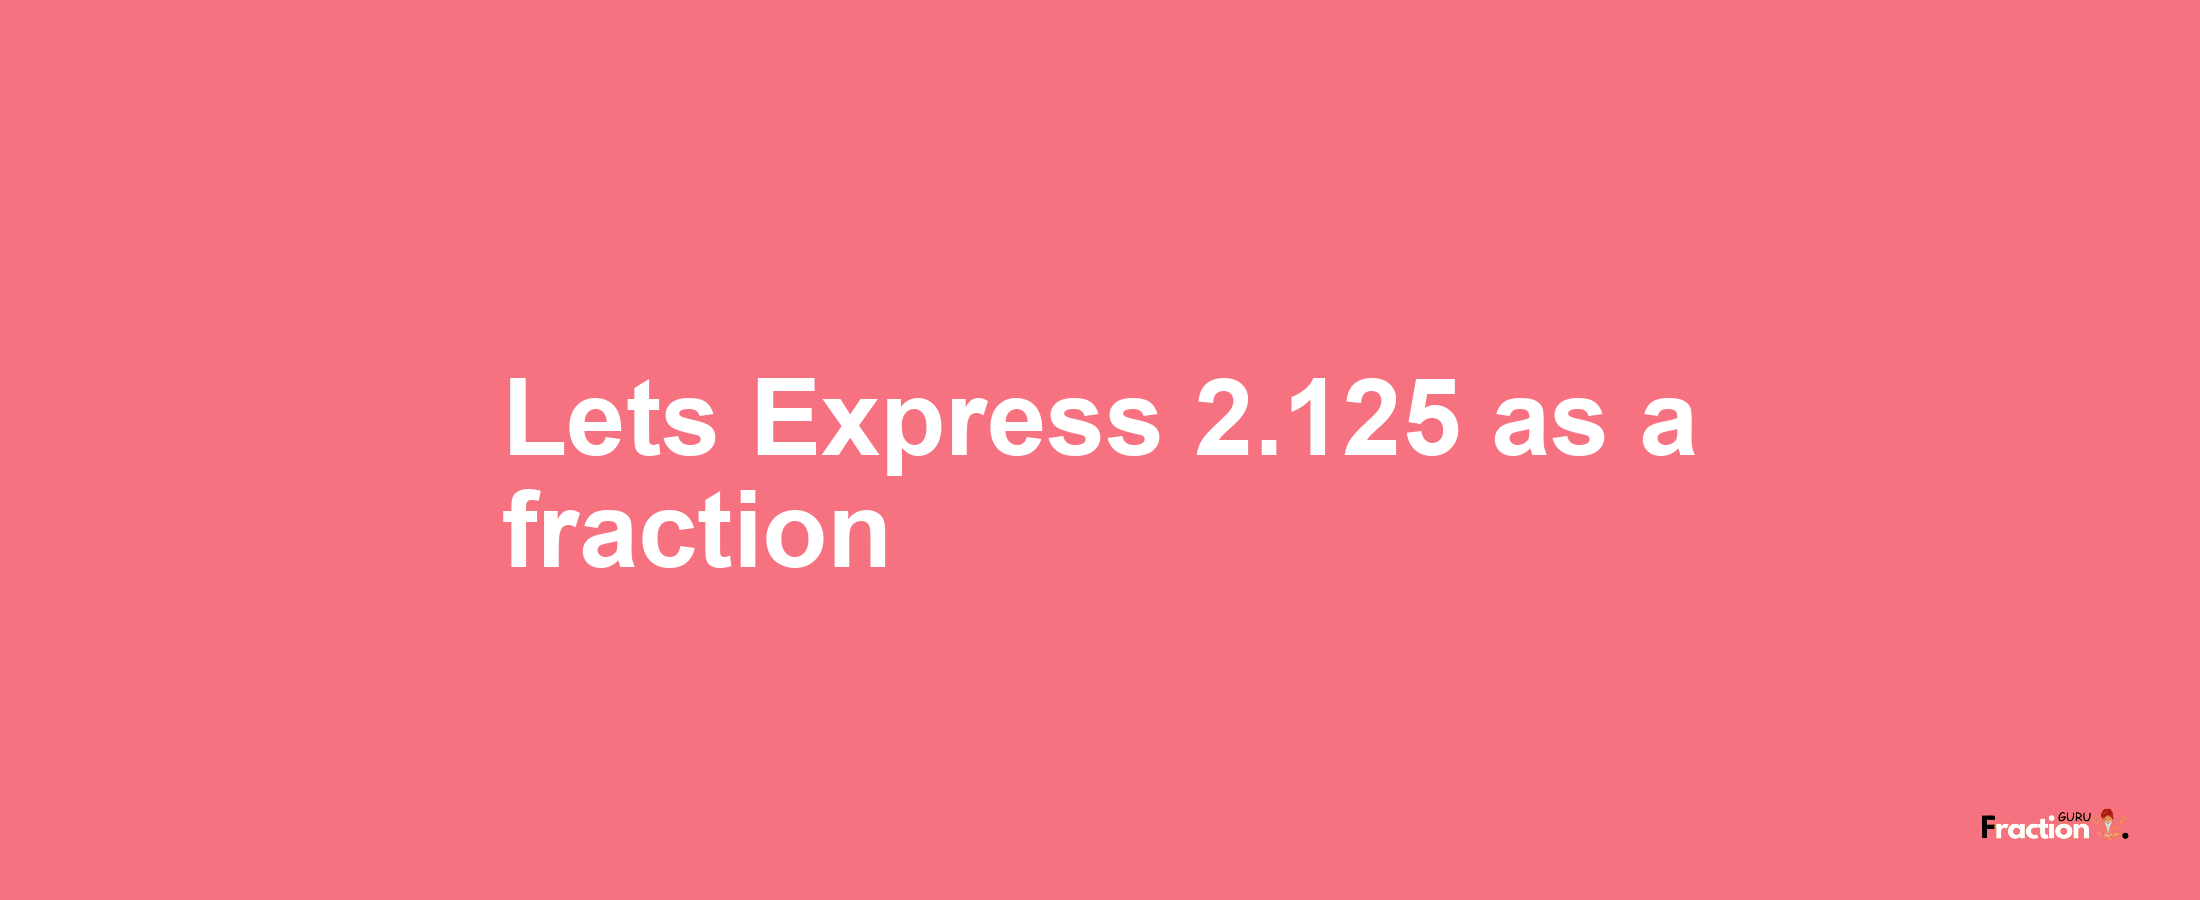 Lets Express 2.125 as afraction